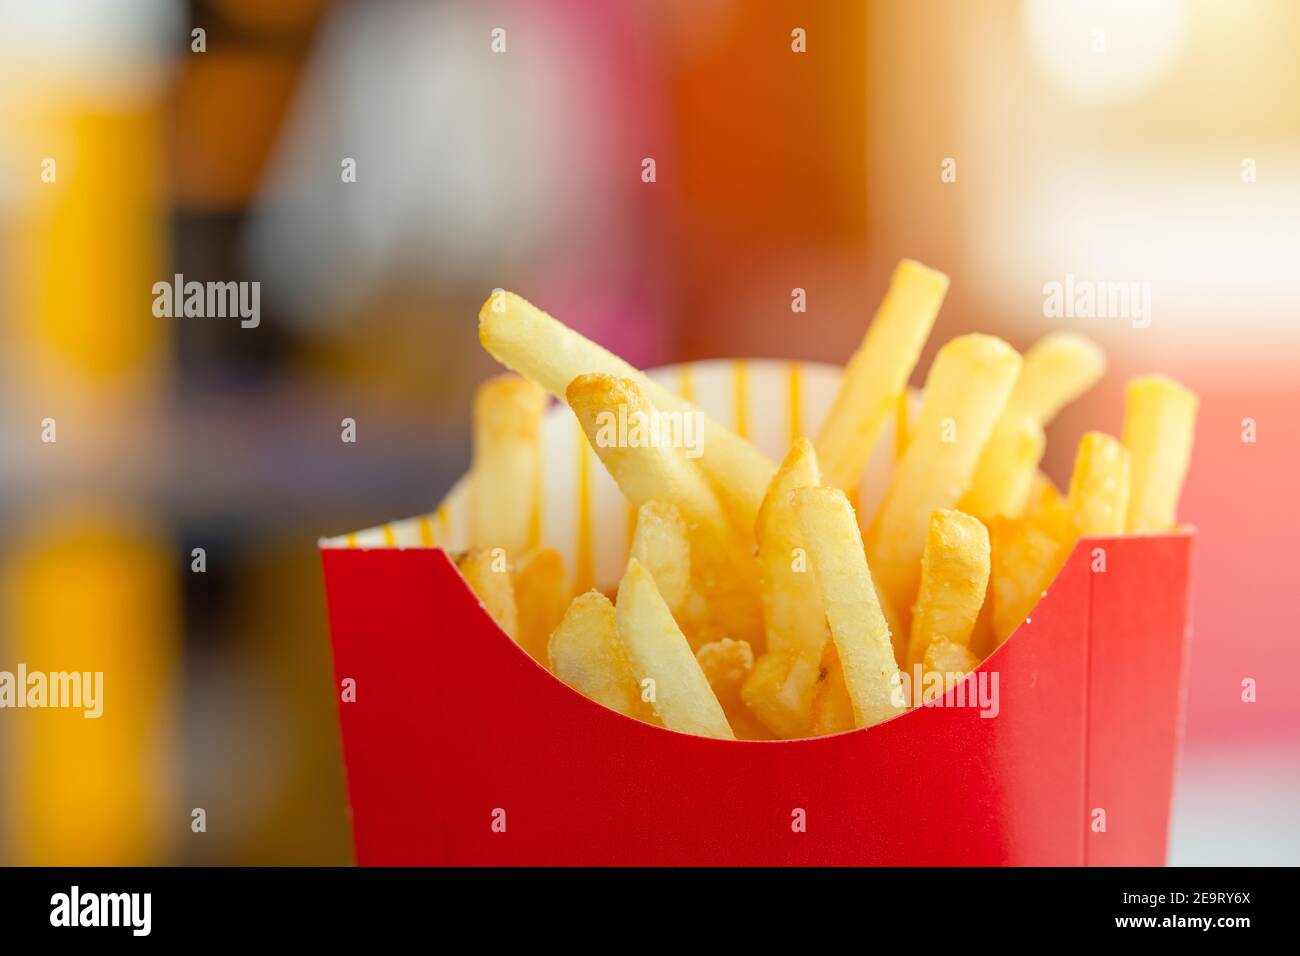 Potato stick fry or French fries high calories carbs fat and salt unhealthy American style popular fast food Stock Photo